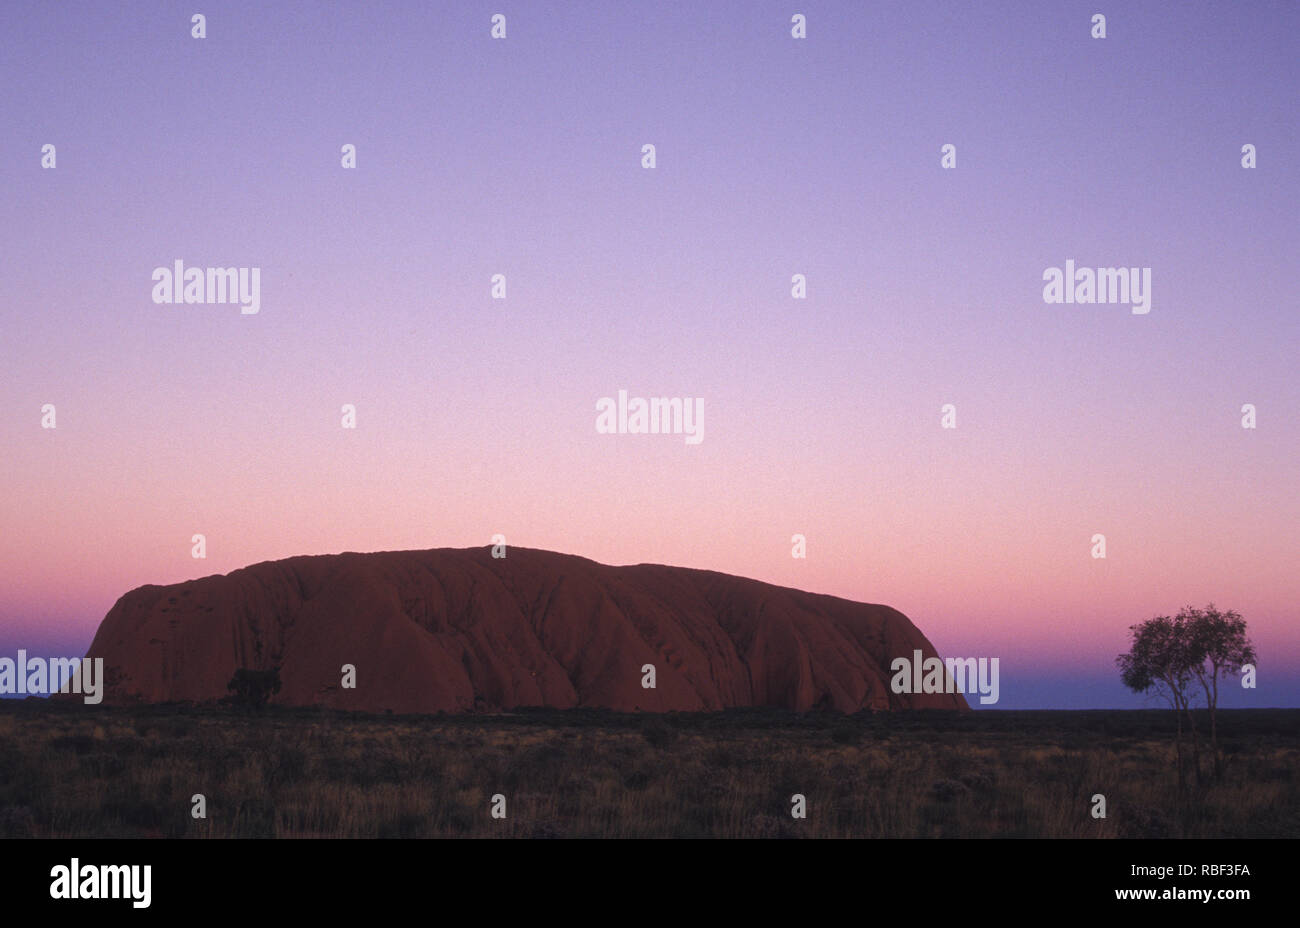 Uluru also known as Ayers Rock and officially gazetted as 'Uluru / Ayers Rock' is a large sandstone rock formation in the southern part of the NT. Stock Photo